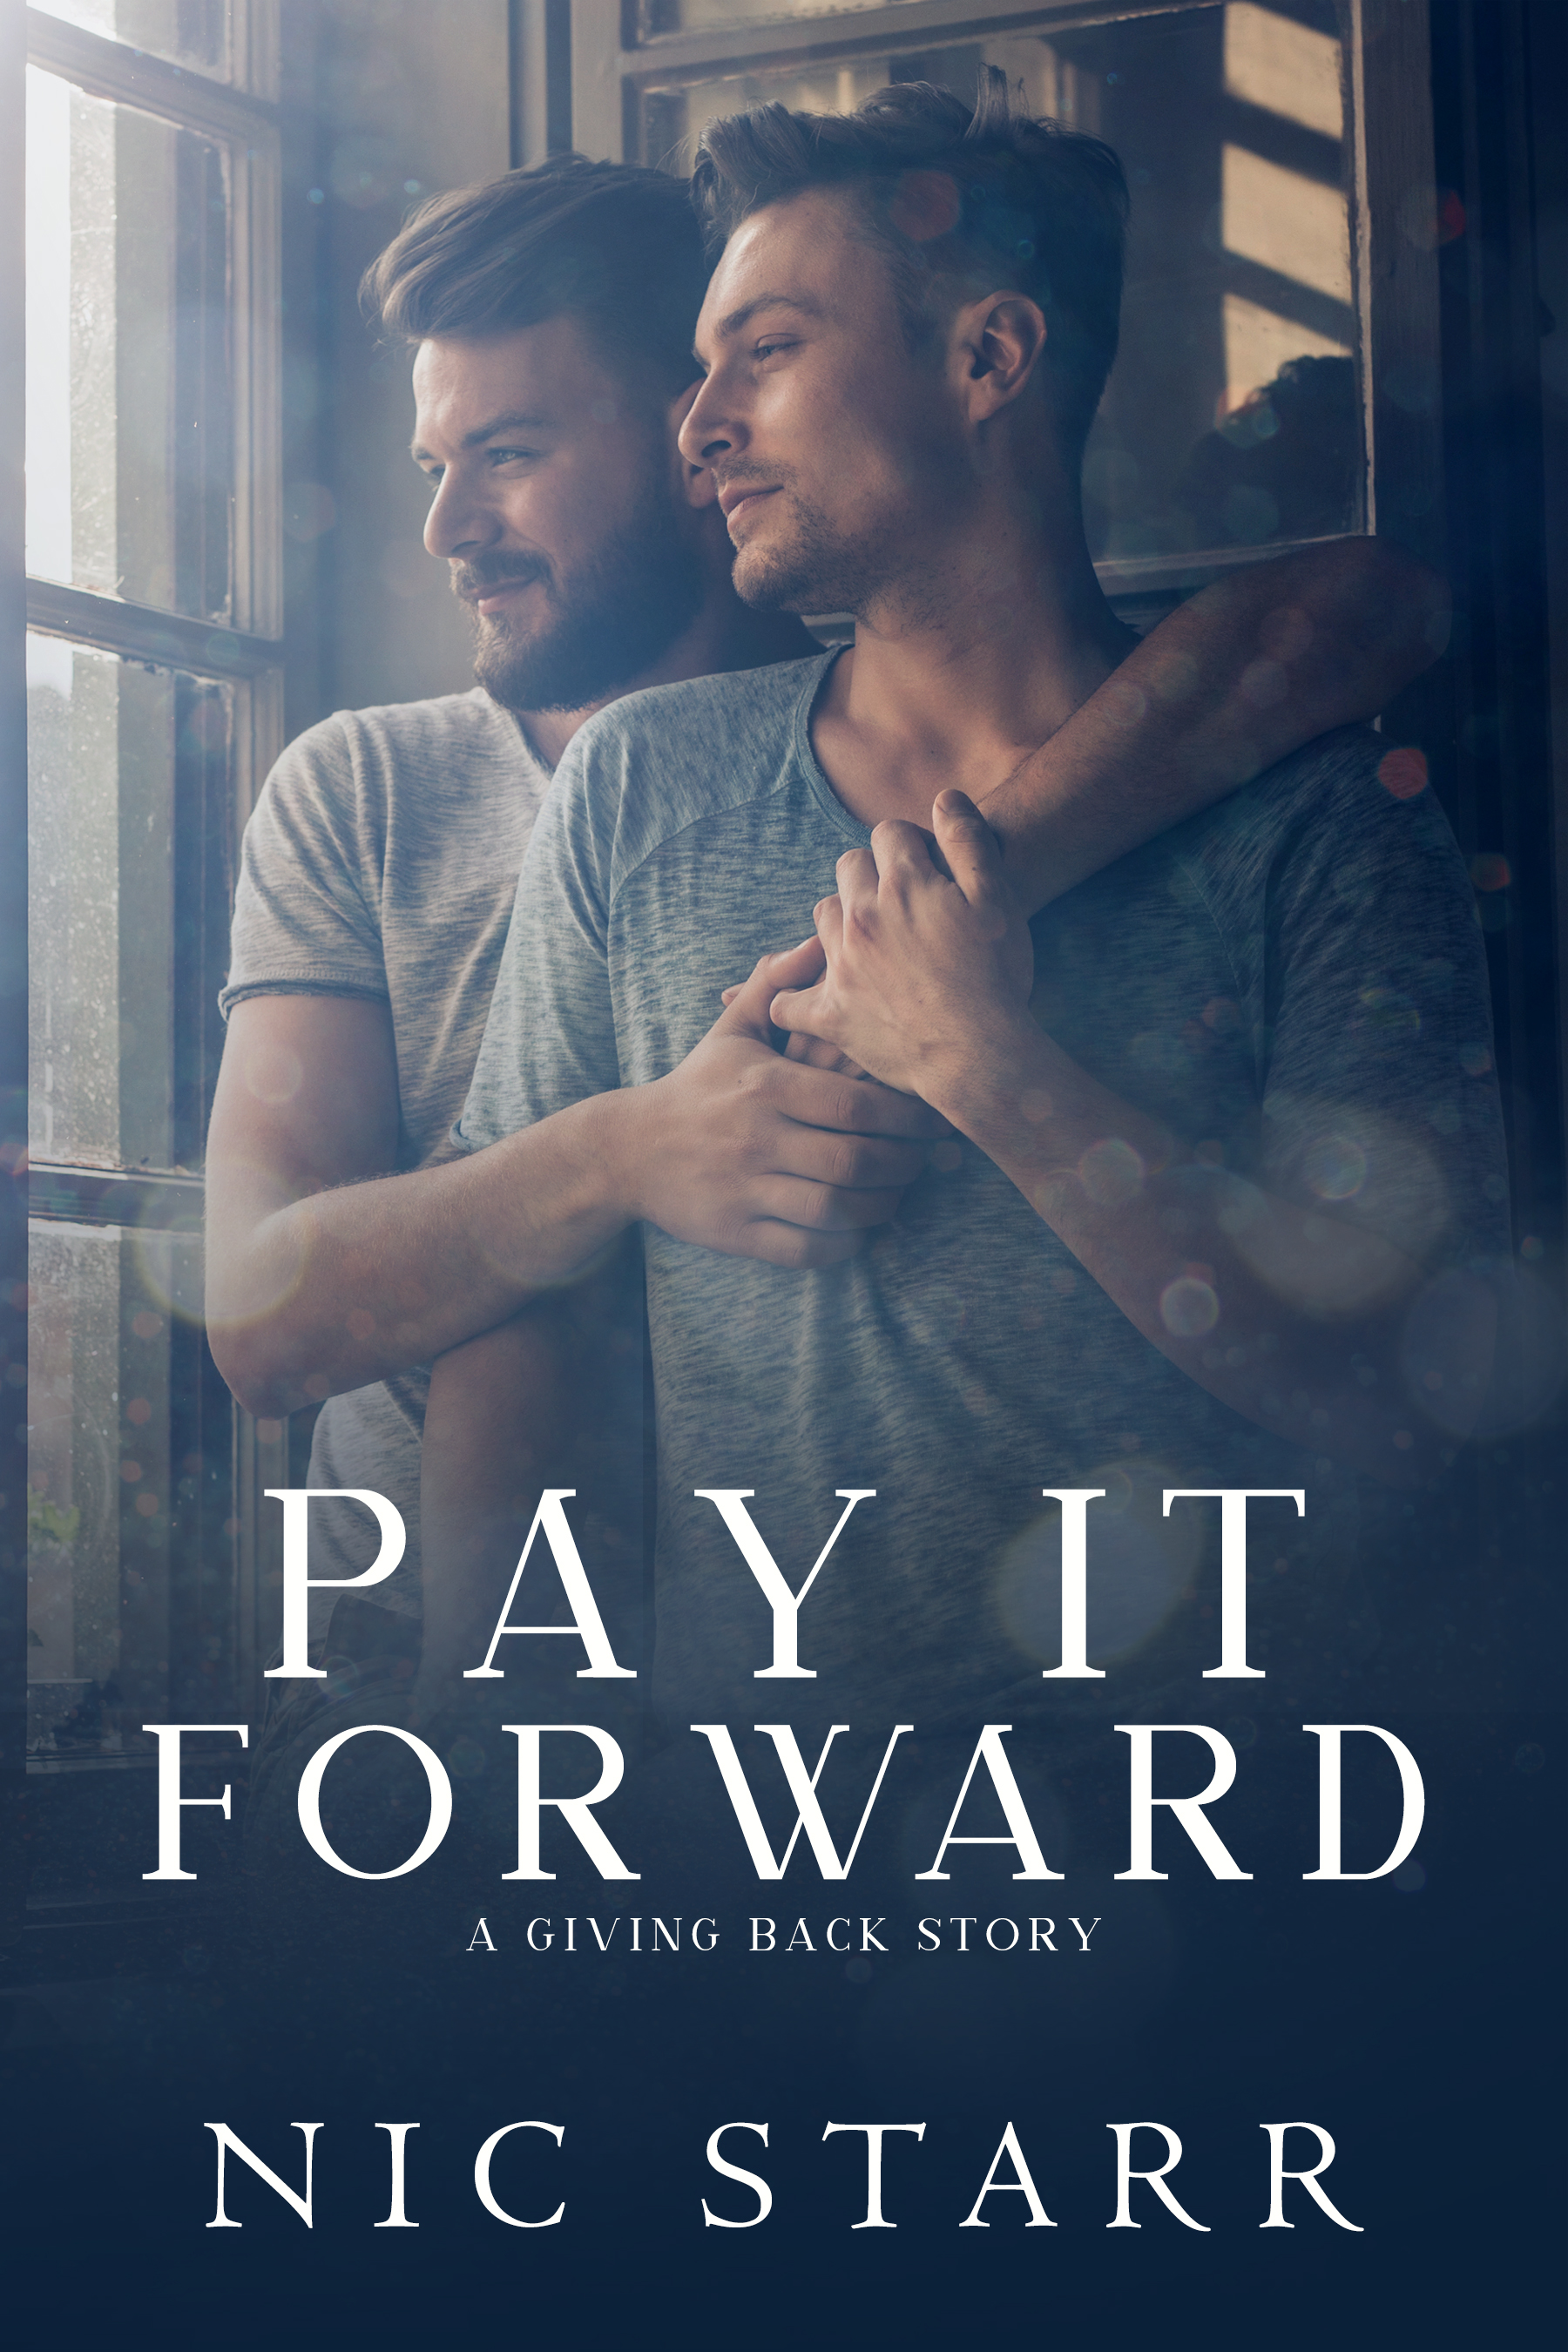 Pay It Forward by Nic Starr